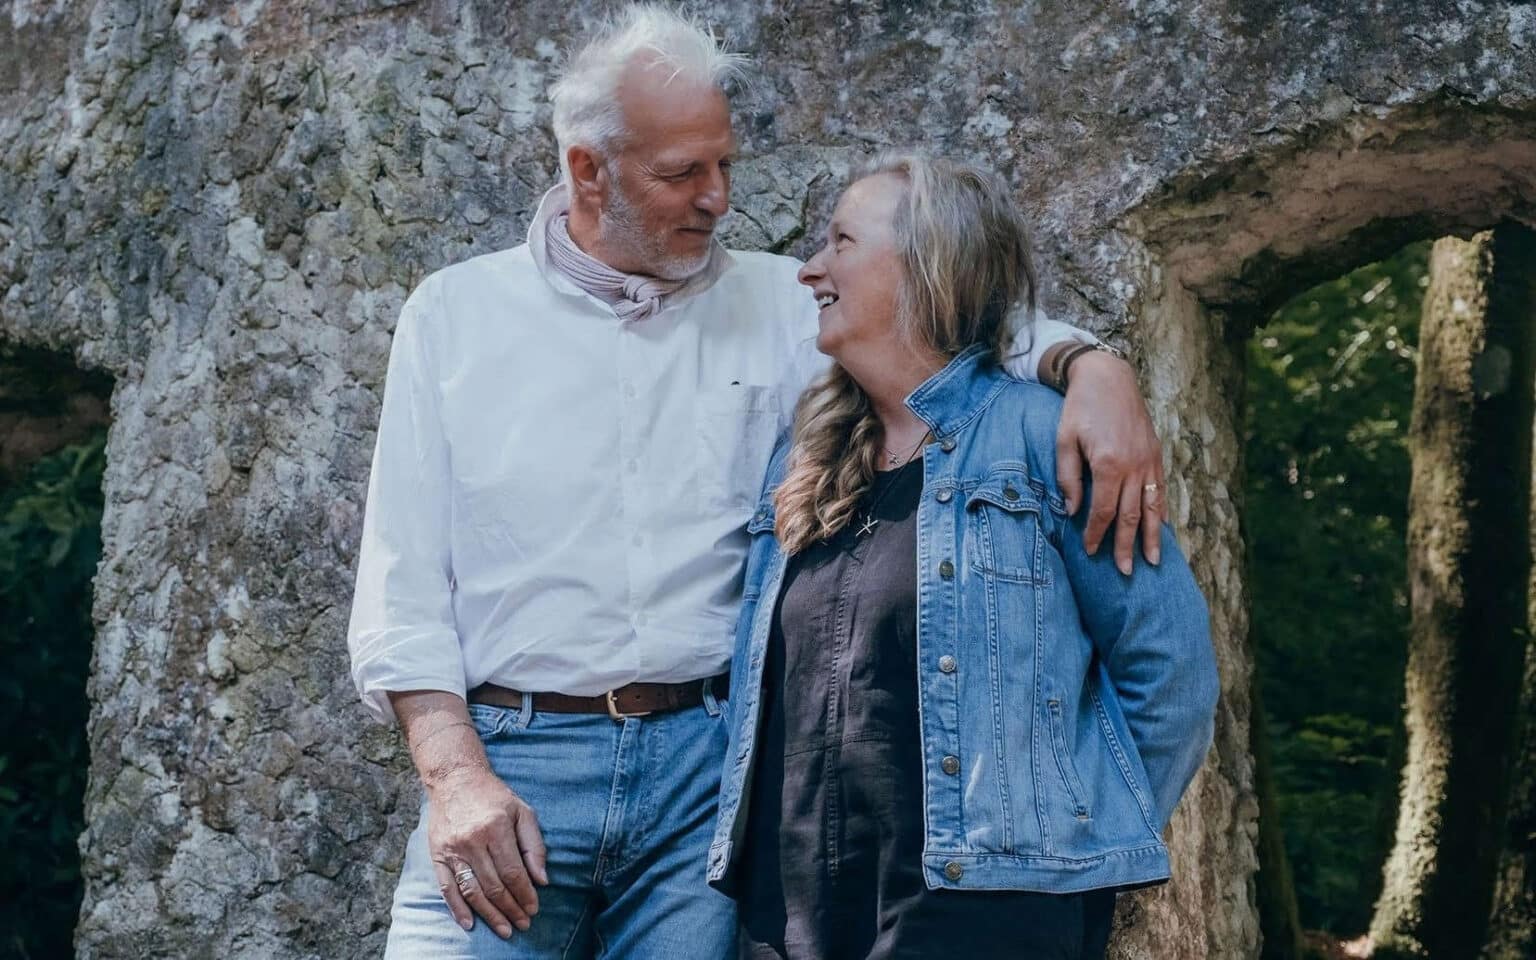 “Salt Path Couple” Share Story of Living with CBD and Hiking Through